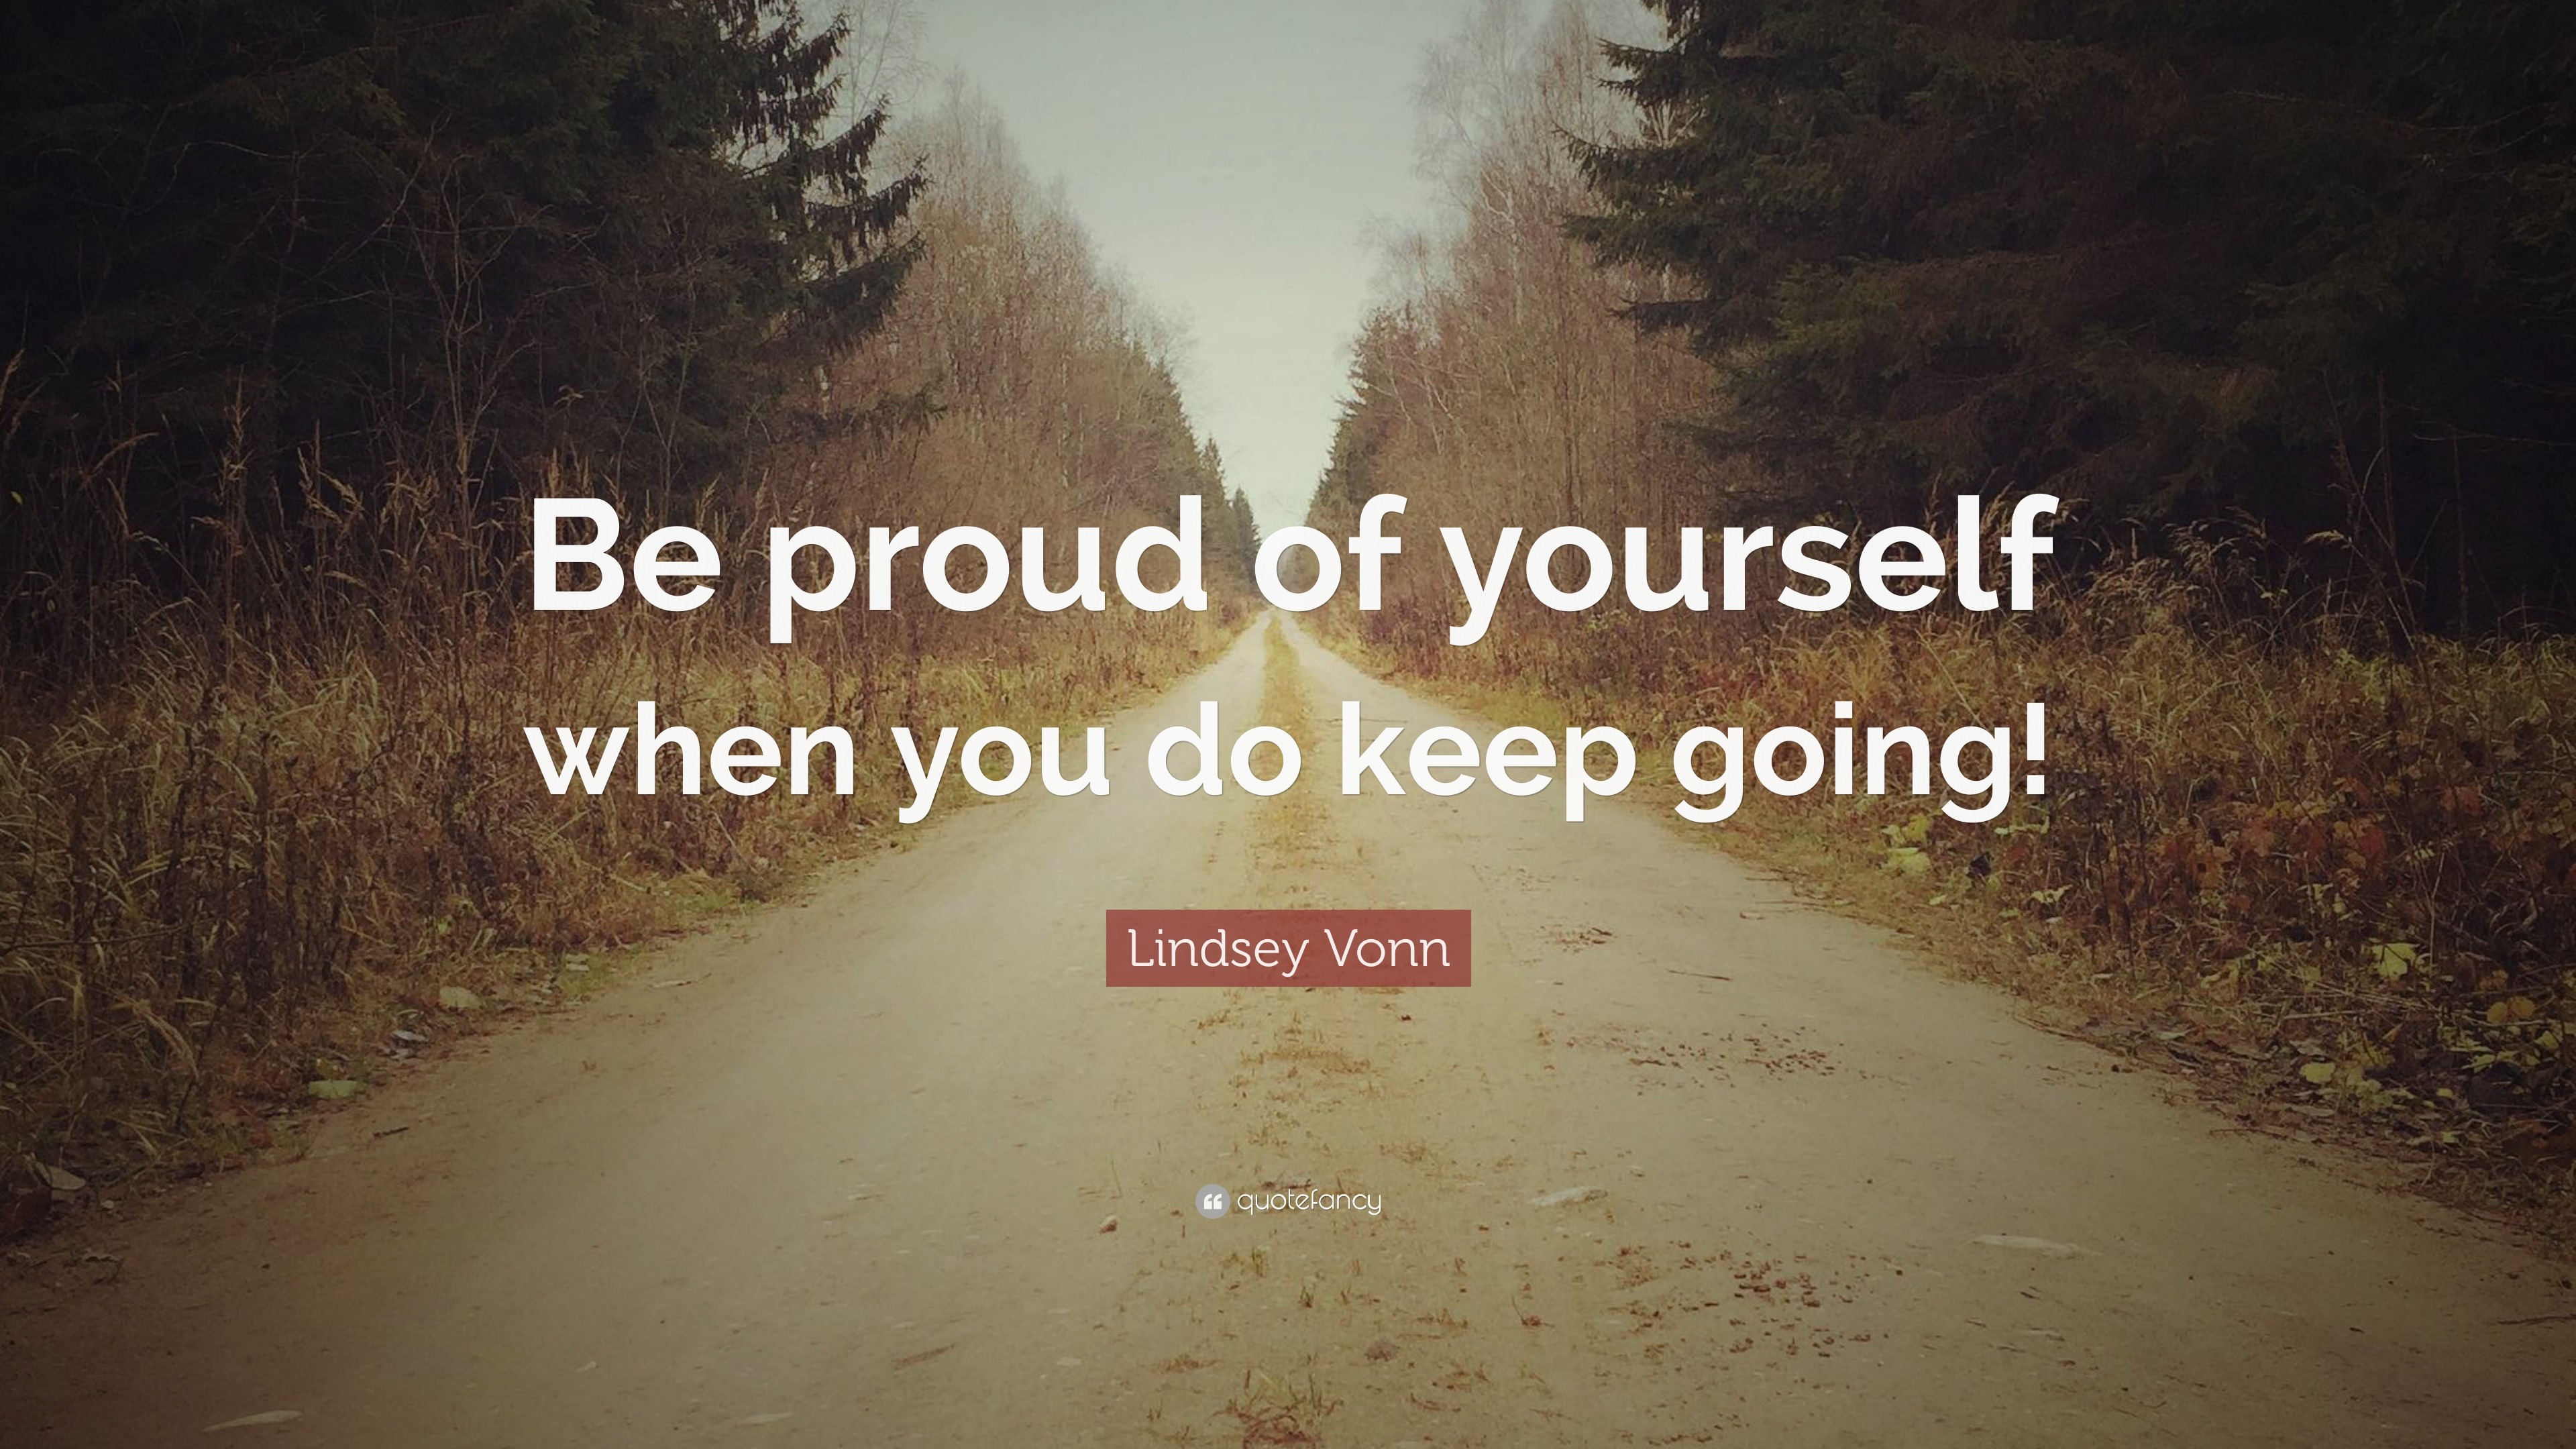 Lindsey Vonn Quote “Be proud of yourself when you do keep